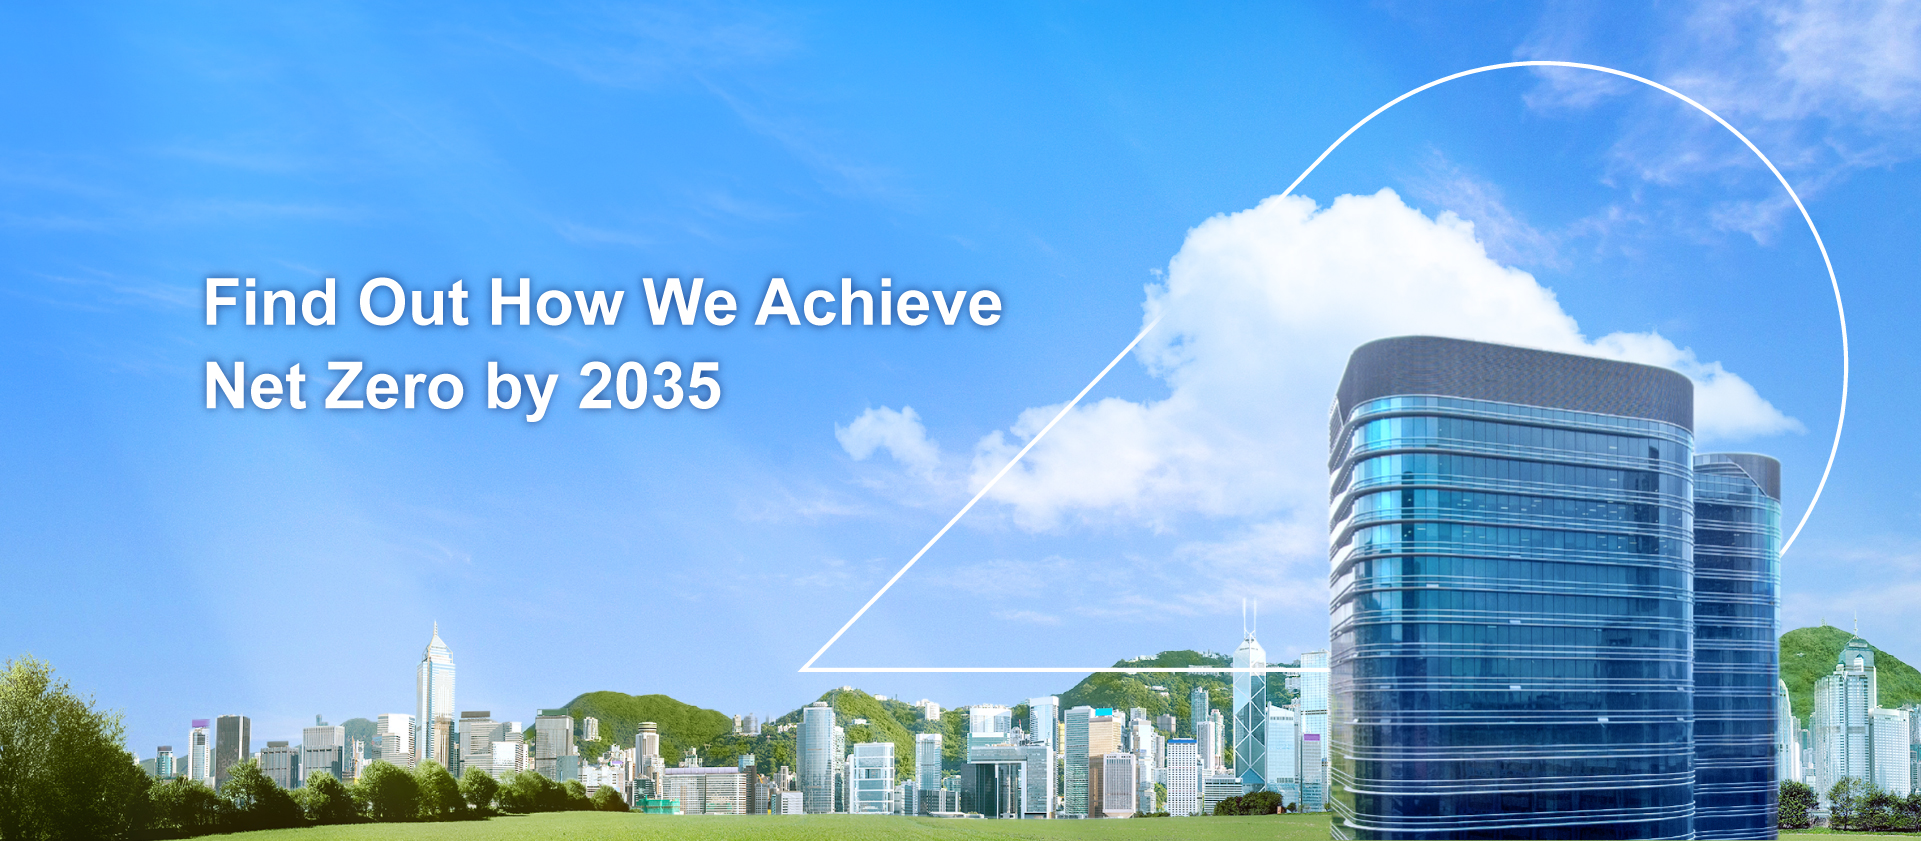 Find Out How We Achieve Net Zero by 2035